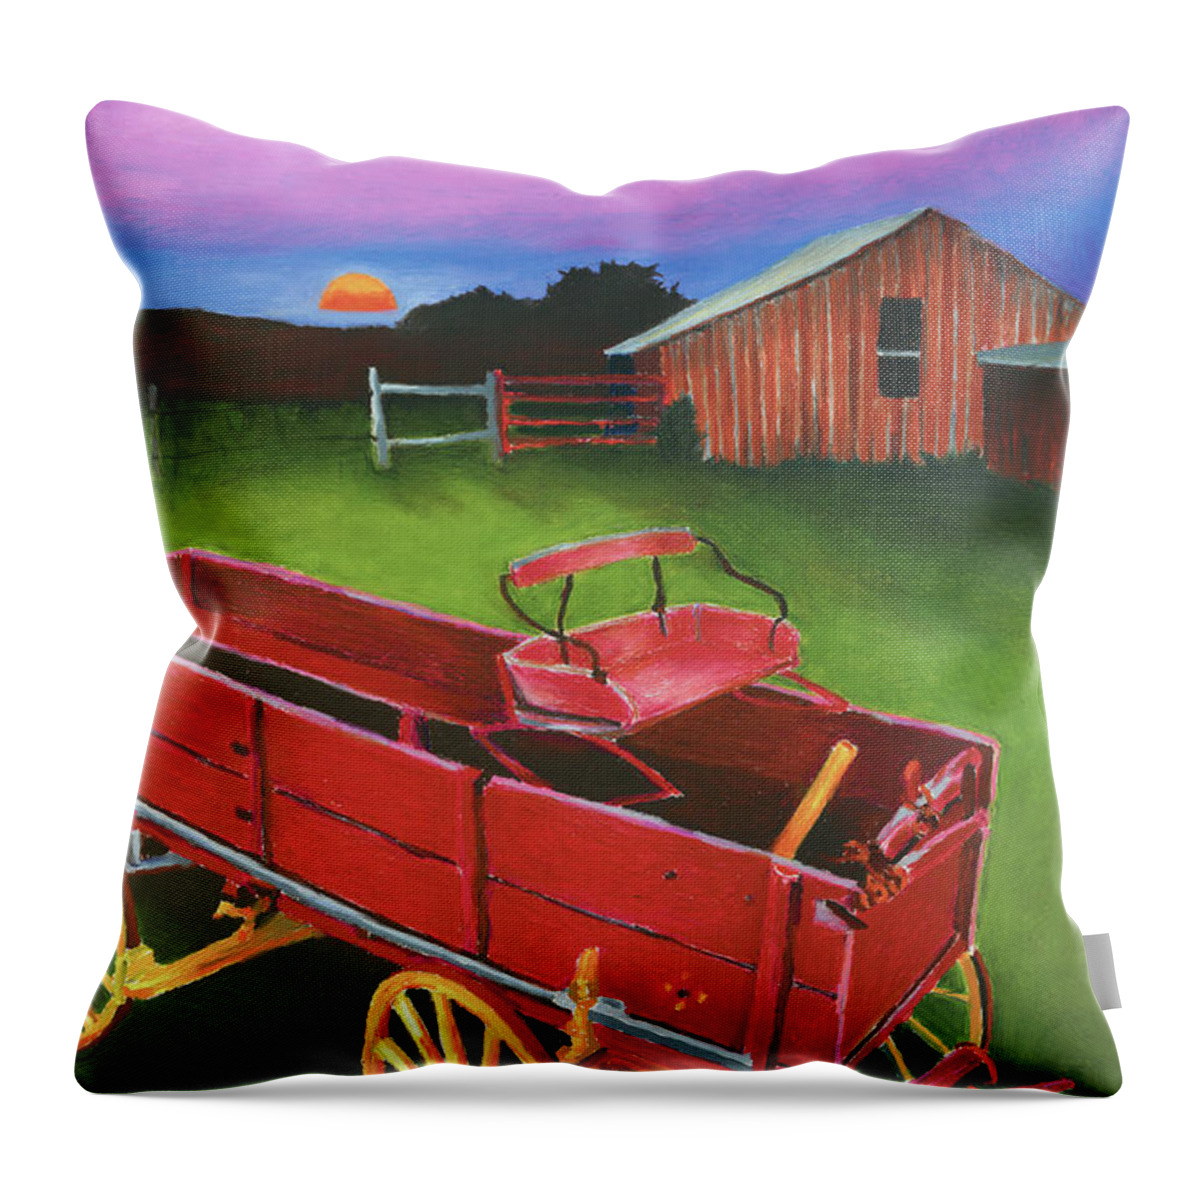 Texas Scenery Throw Pillow featuring the painting Red Buckboard Wagon by Stephen Anderson